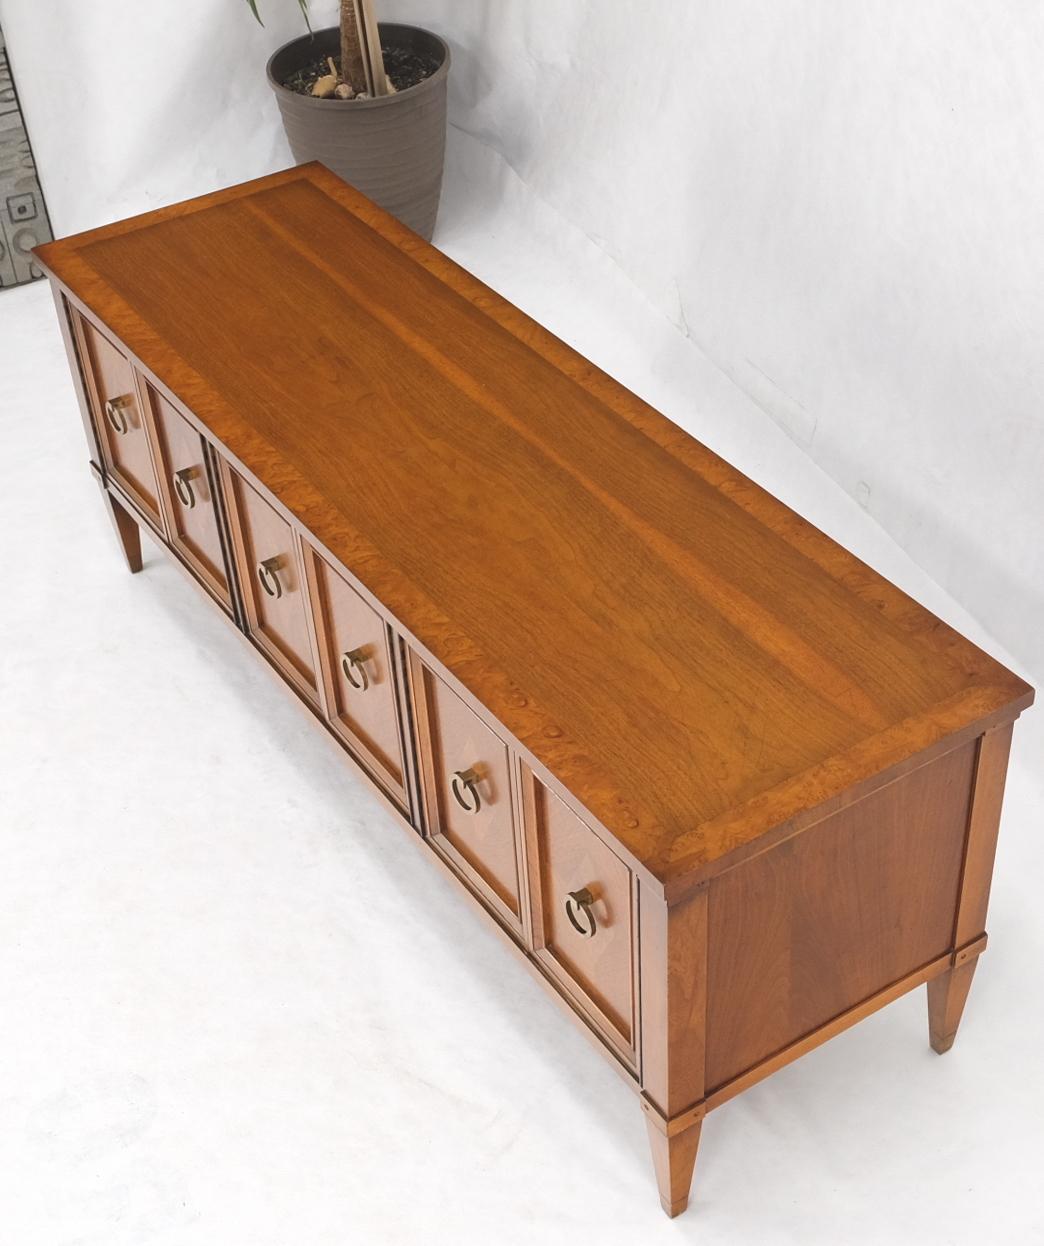 American Brass Rings Drop Pulls 6 Doors 3 Compartments Low Entry Credenza Cabinet Console